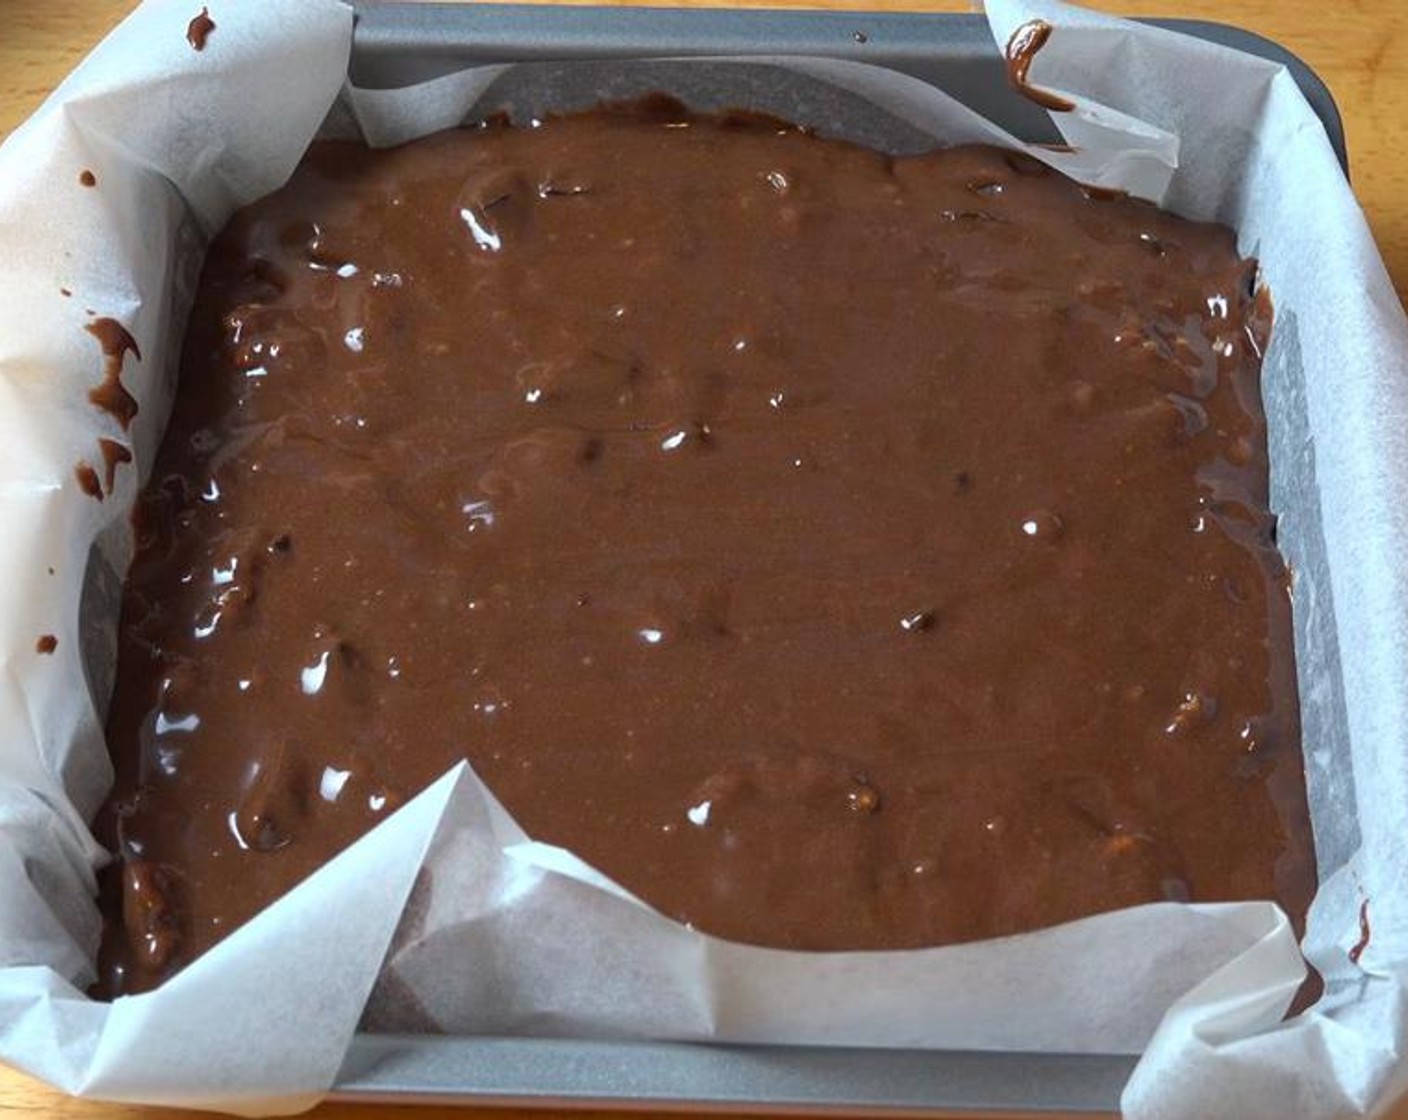 step 5 Transfer brownie batter into a lightly greased 8-inch square cake pan lined with non-stick baking paper. Smooth the surface.